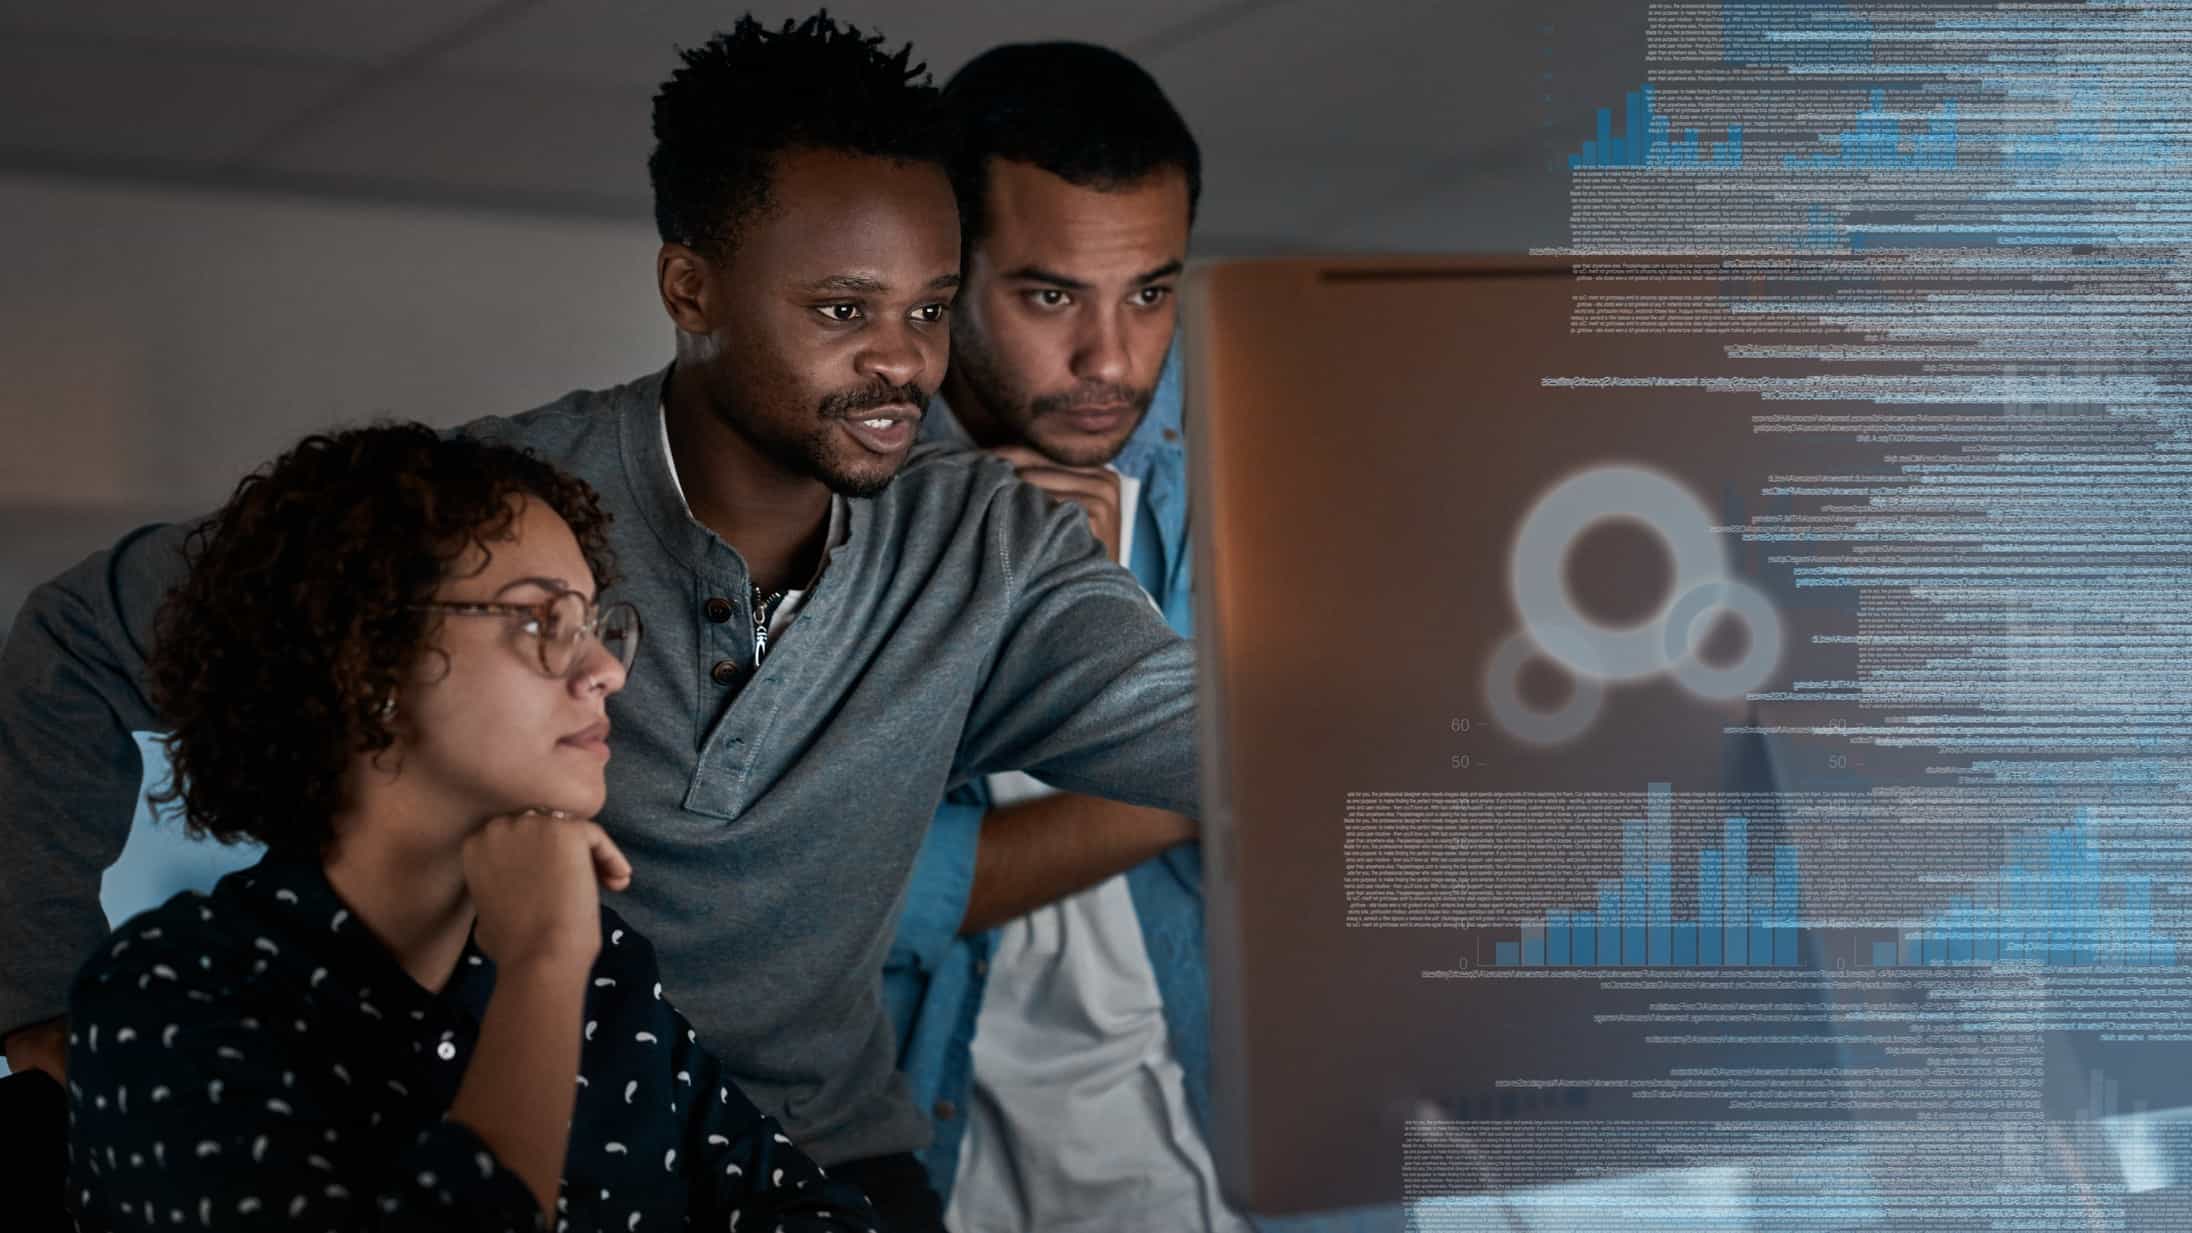 three people gather around a large computer screen where they are looking at something that is captivating their interest with a graphic image of data and digital technology material superimposed to the right hand third of the image.